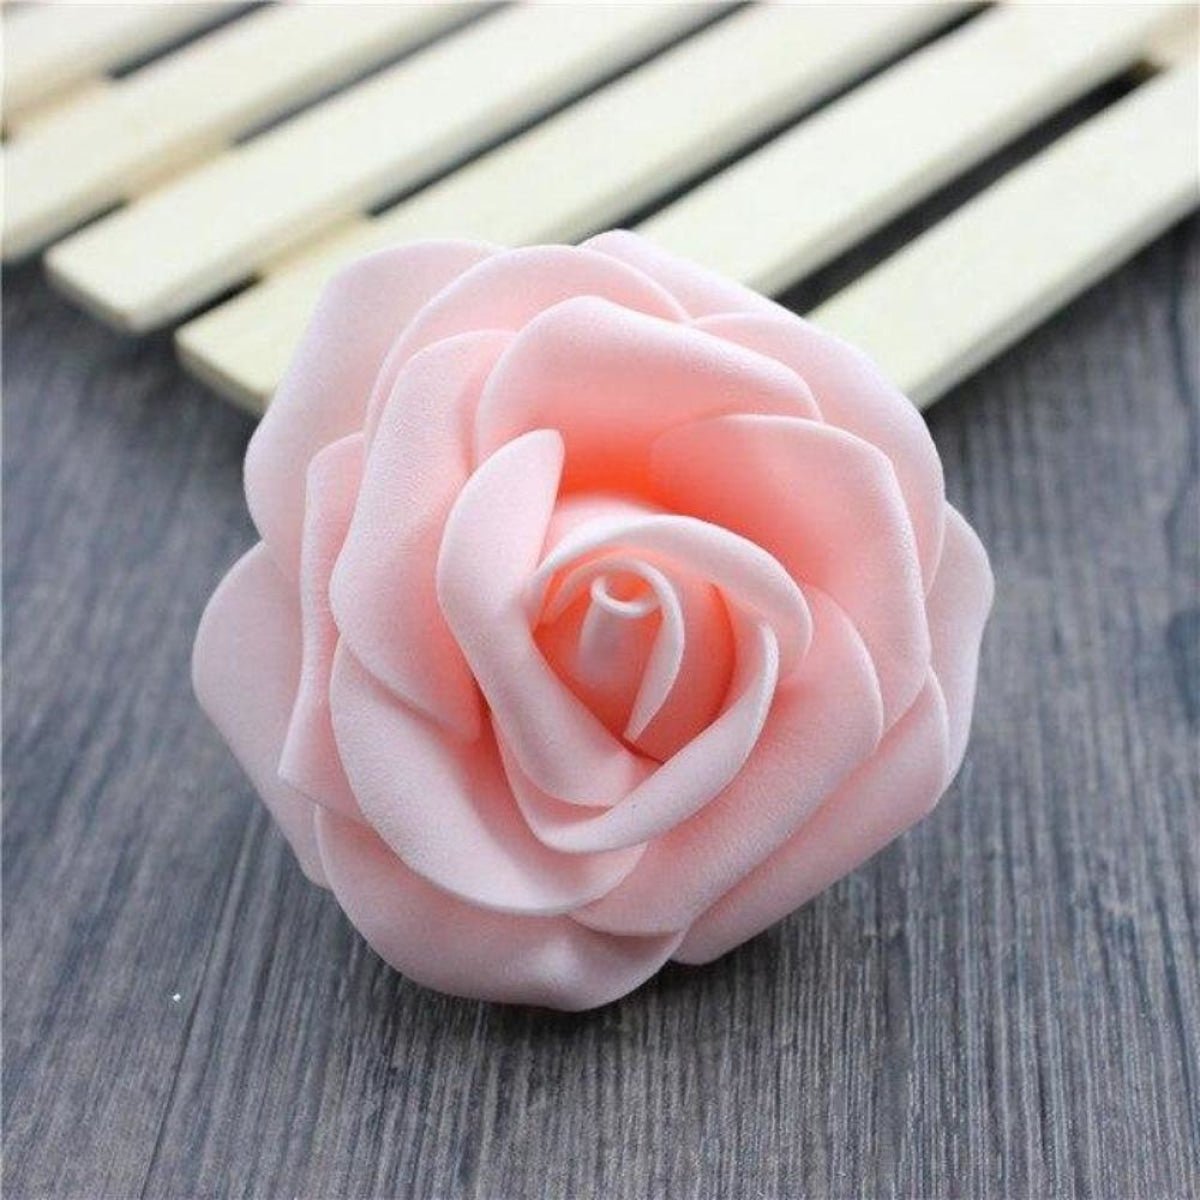 7.5cm Artificial Fake Flowers Foam Rose Head For Wedding Decorations DIY Wreaths - 30pcs Pink - Asia Sell